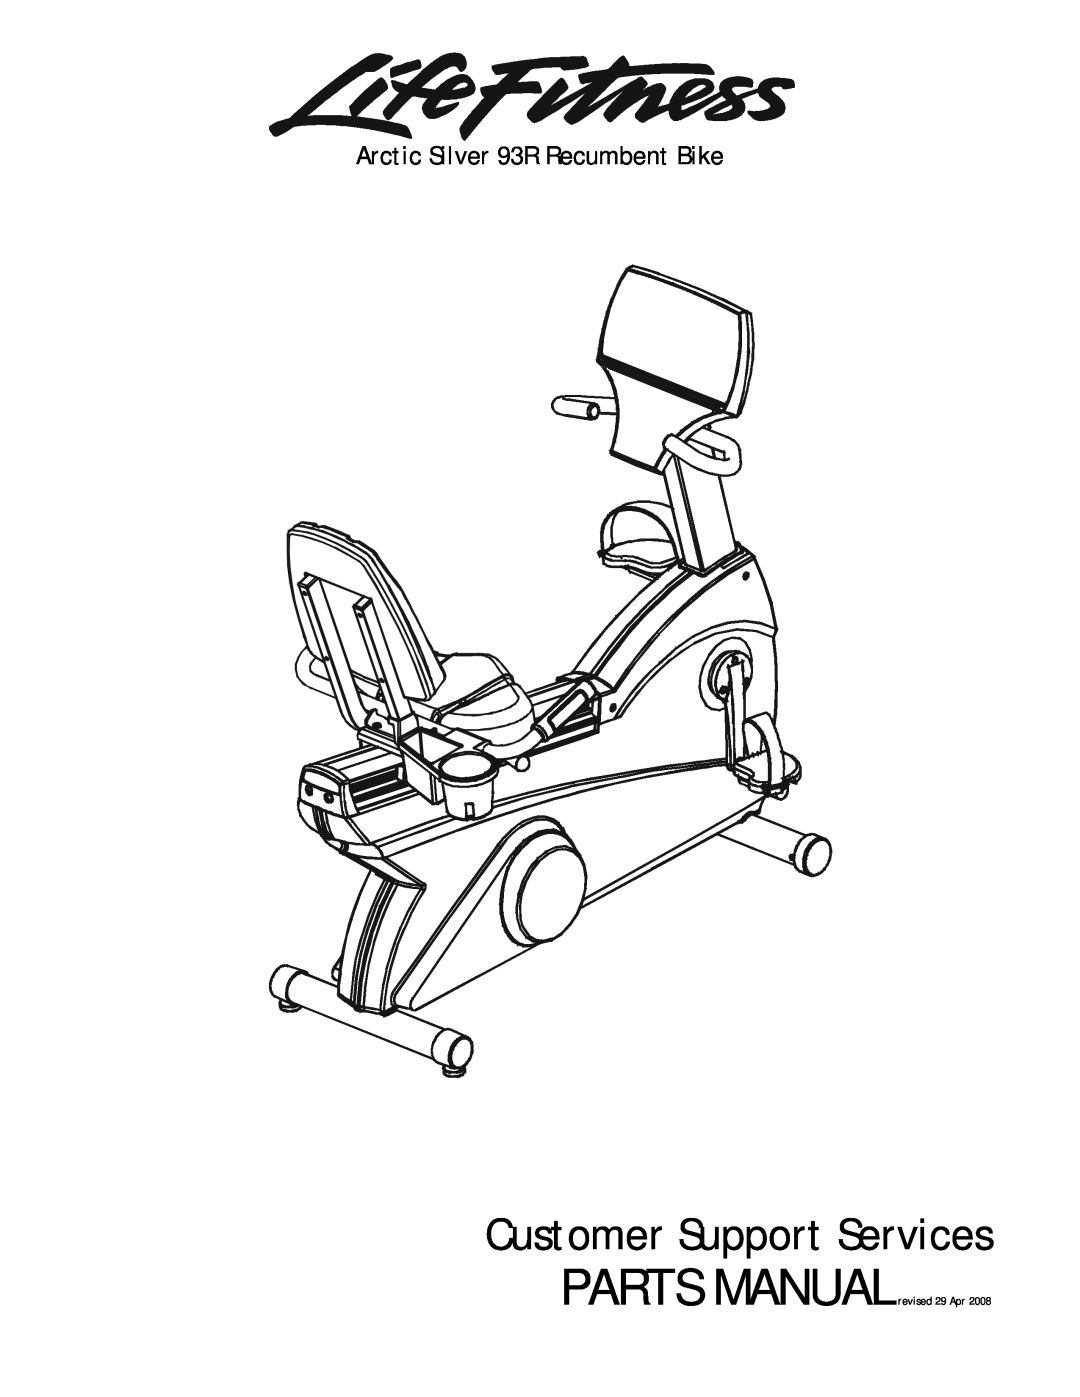 Life Fitness manual Customer Support Services, Arctic Silver 93R Recumbent Bike, PARTS MANUALrevised 29 Apr 